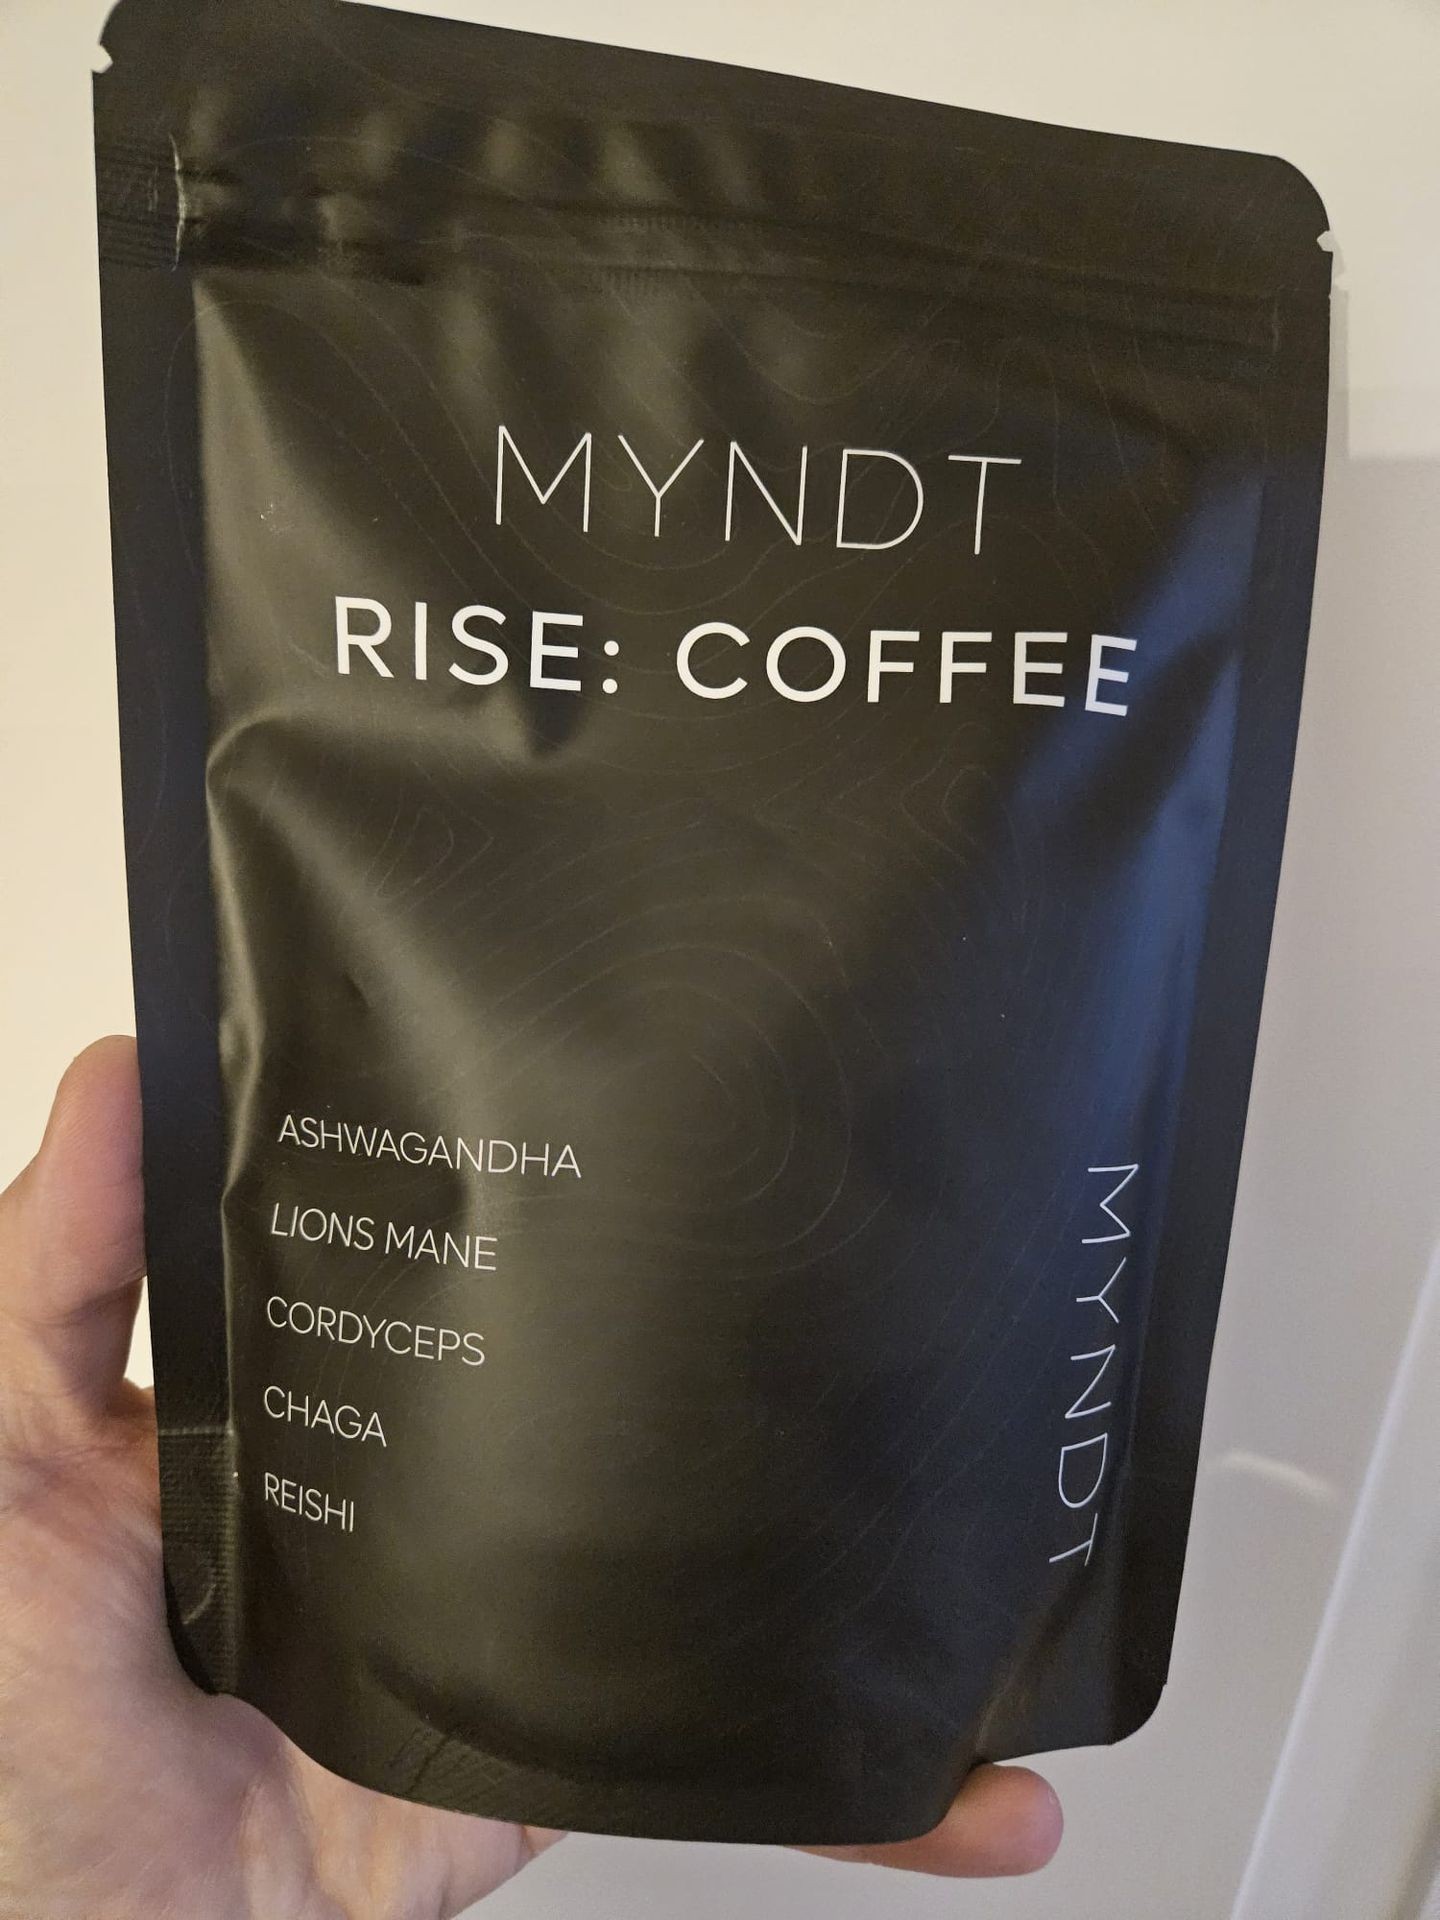 Myndt Rise Coffee Packung